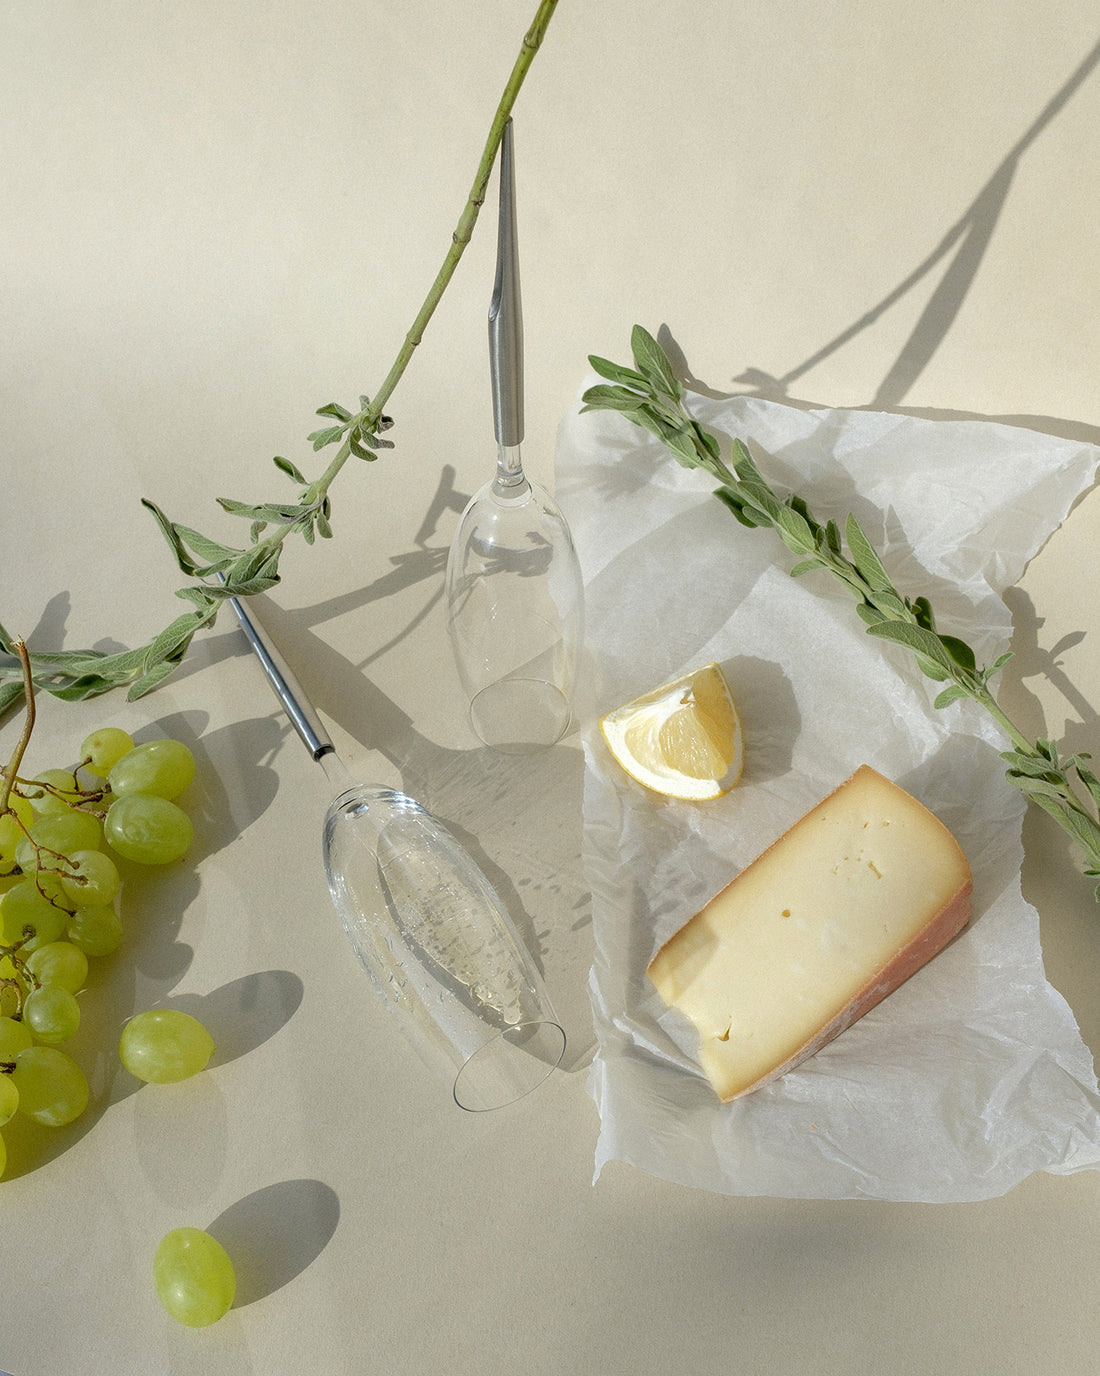 pointer wine glasses for champagne photographed next to cheese, lemon, white grapes and plants